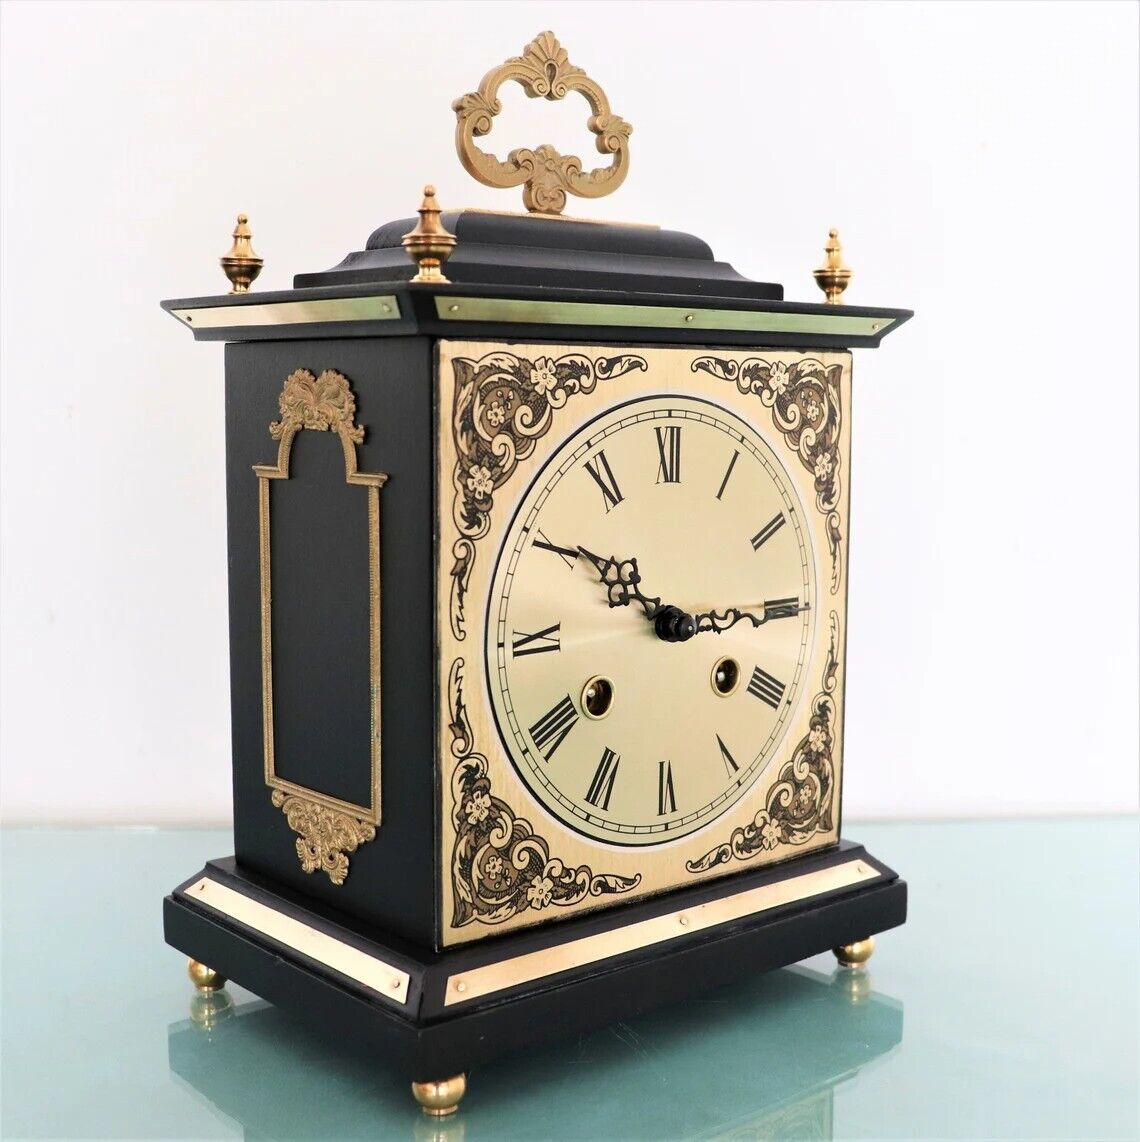 HERMLE Mantel Clock Vintage TOP Black Restored AND Serviced DOUBLE BELL Chime